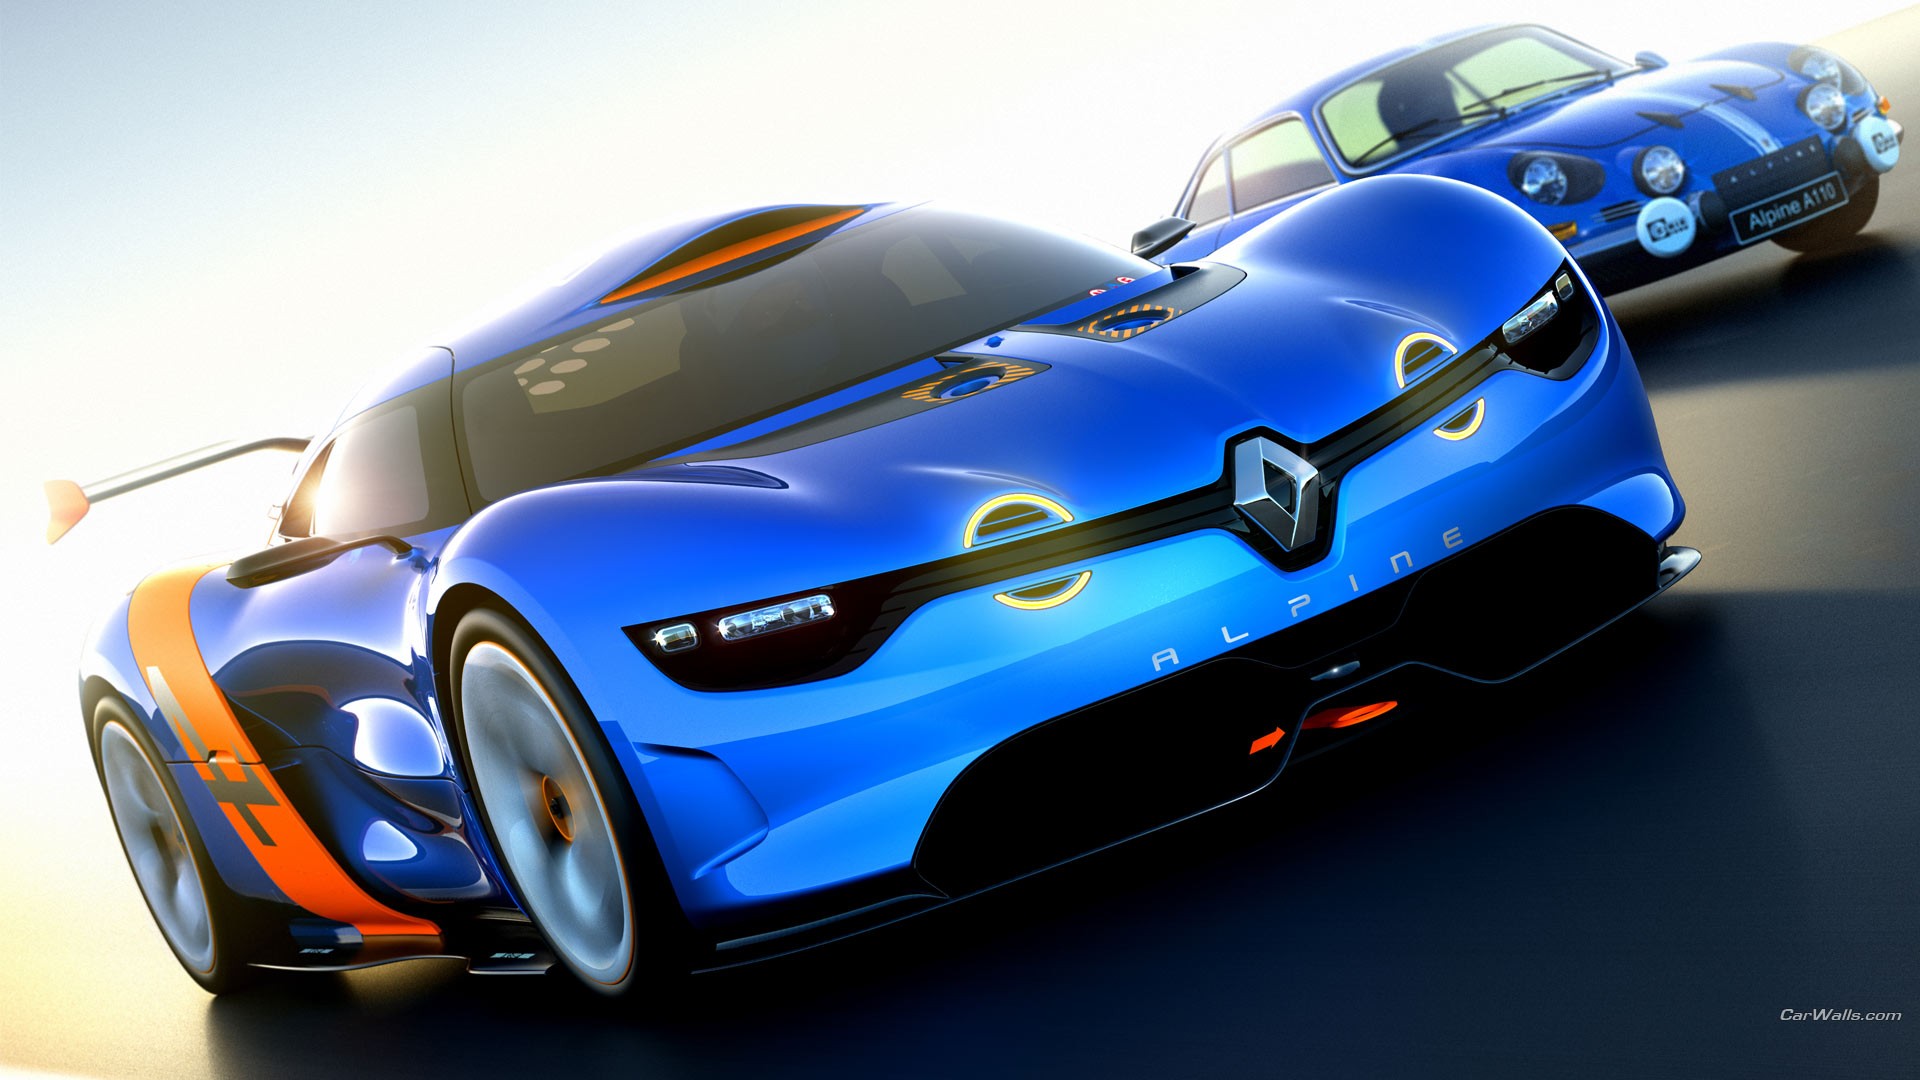 General 1920x1080 car Renault Alpine Renault vehicle blue cars French Cars Alpine A110-50 Alpine A110 watermarked